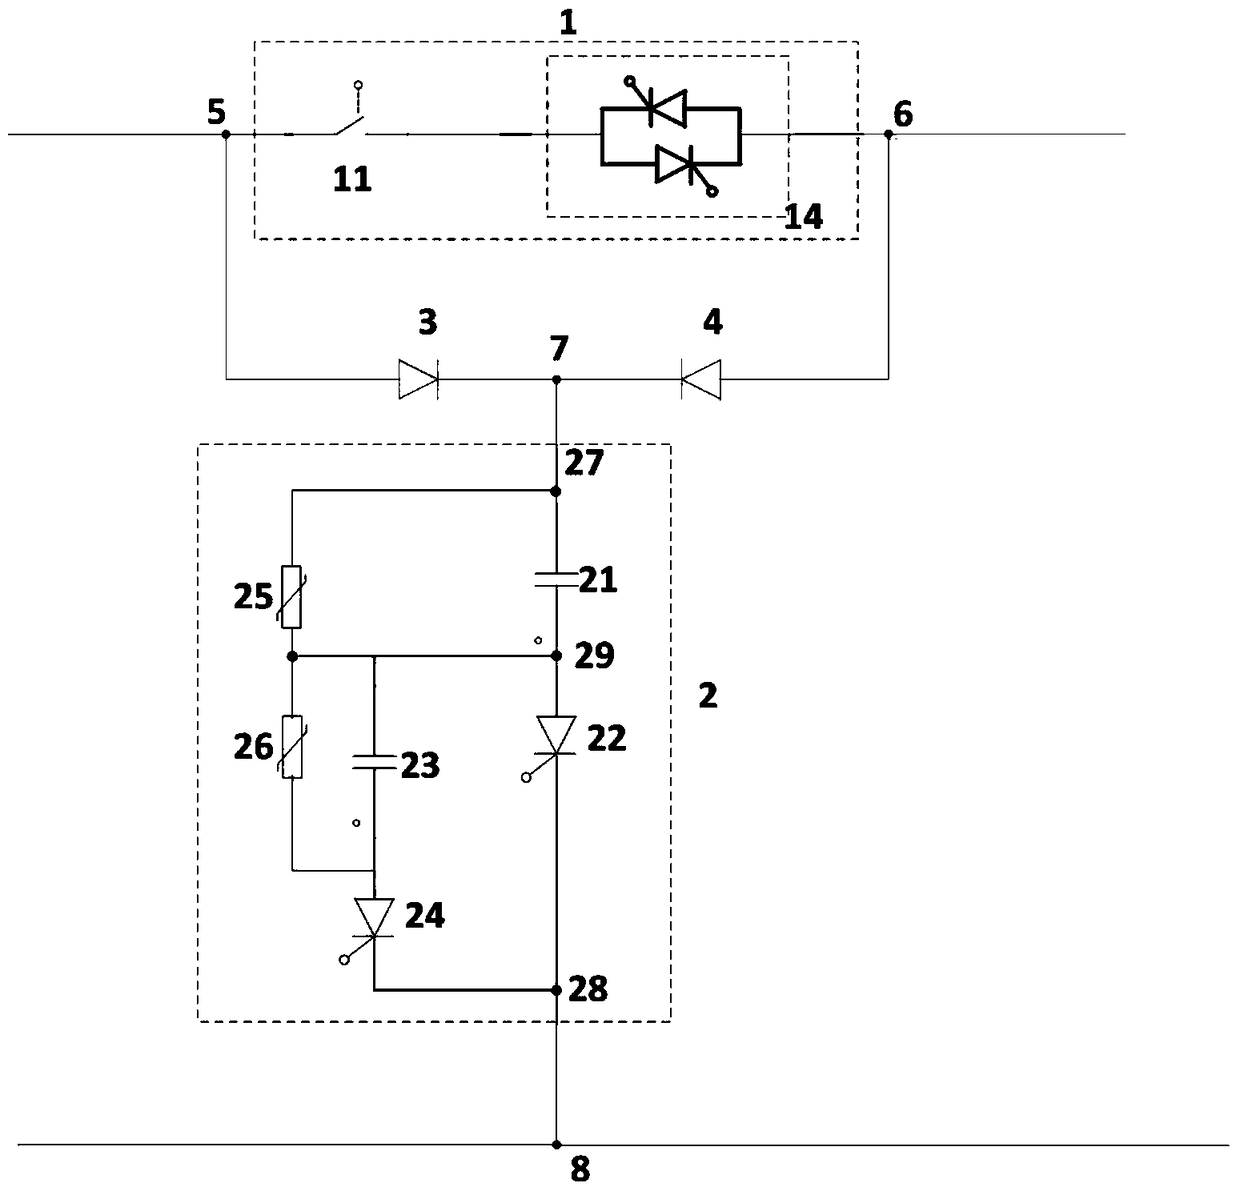 A thyristor-based DC circuit breaker topology with bidirectional blocking function